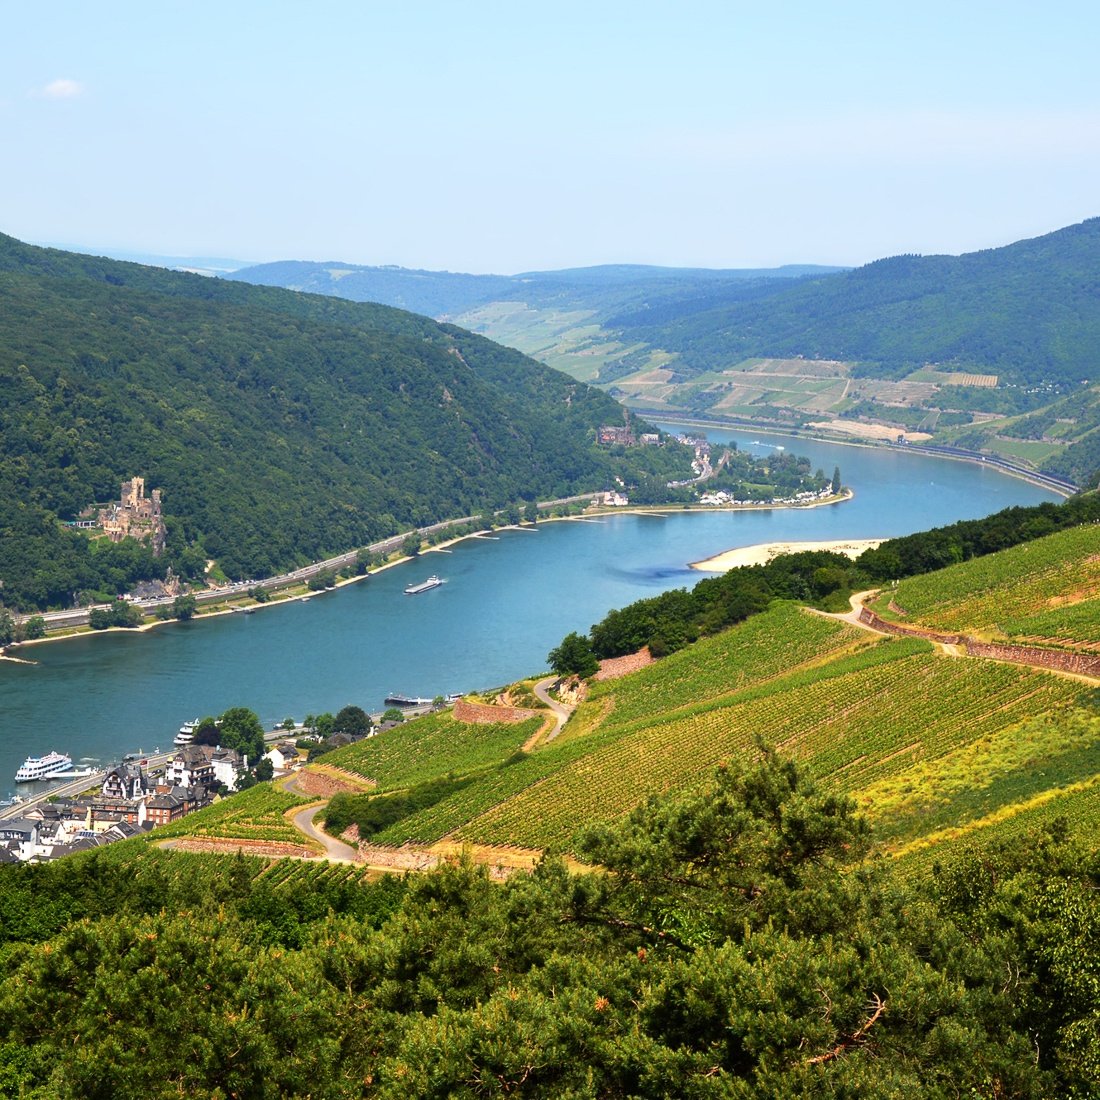 Viking River Rhine Cruise Review: Ports and Excursions